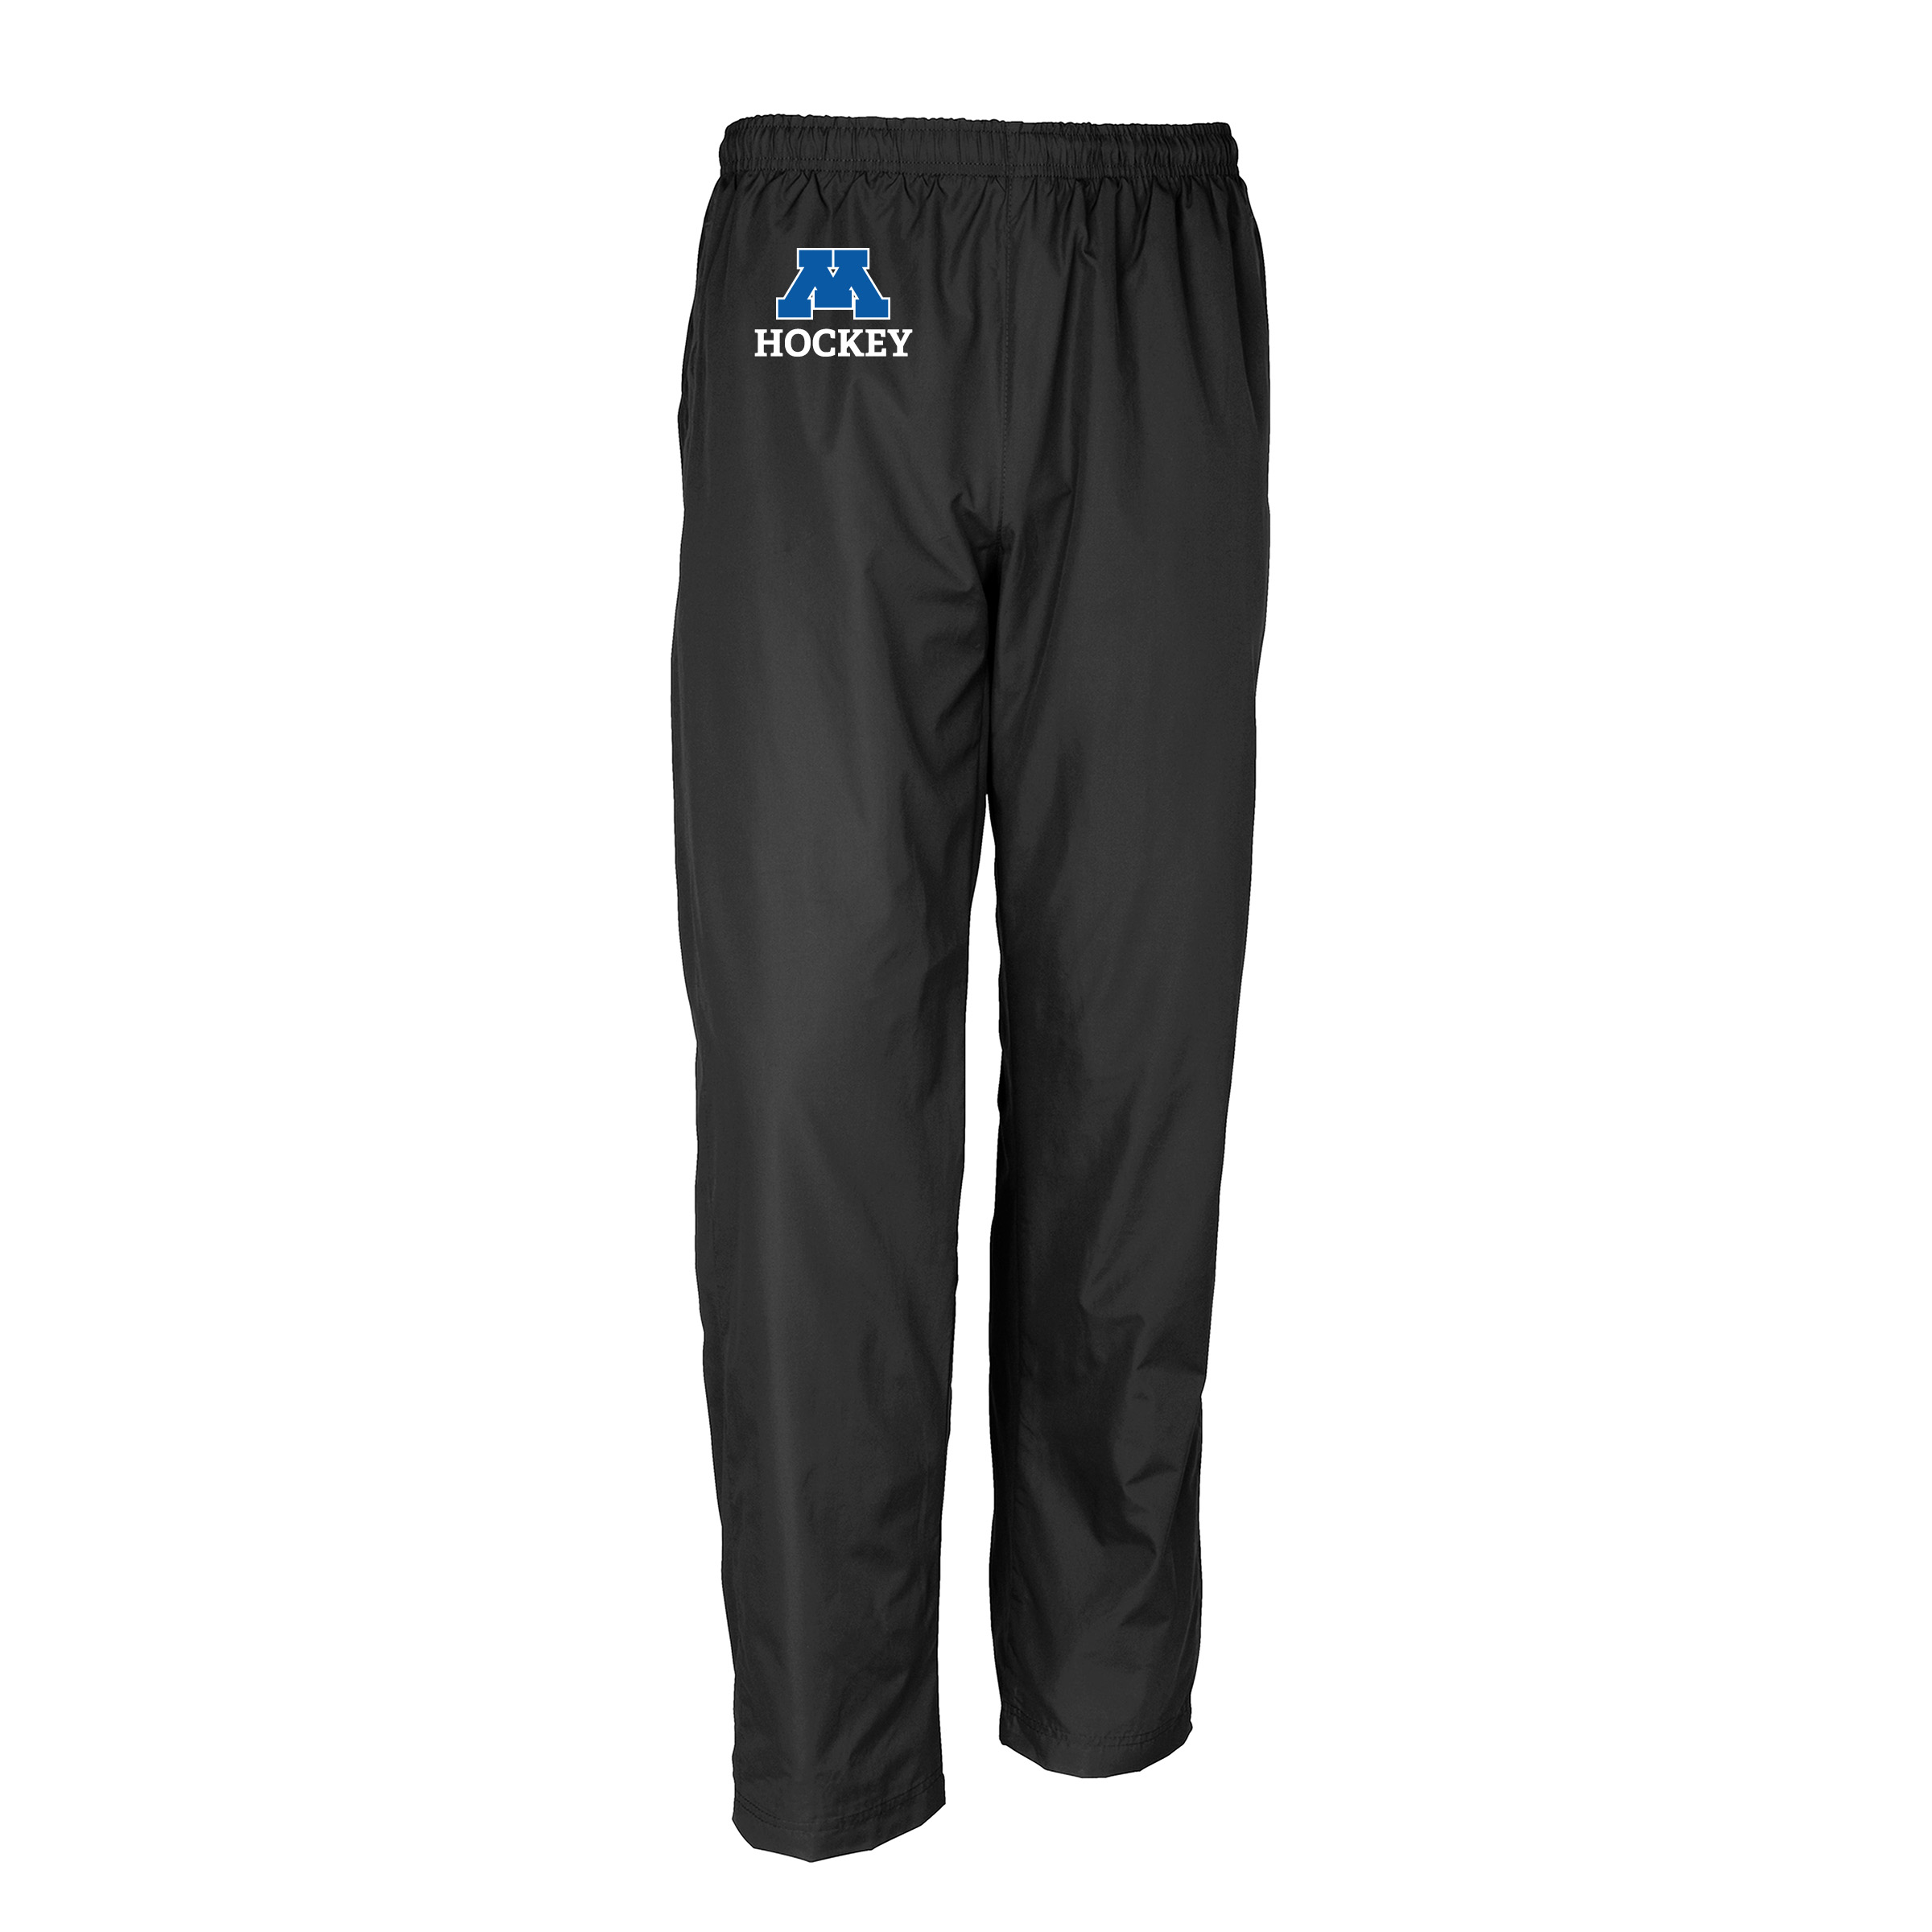 Wind Pants – Small Front Logo